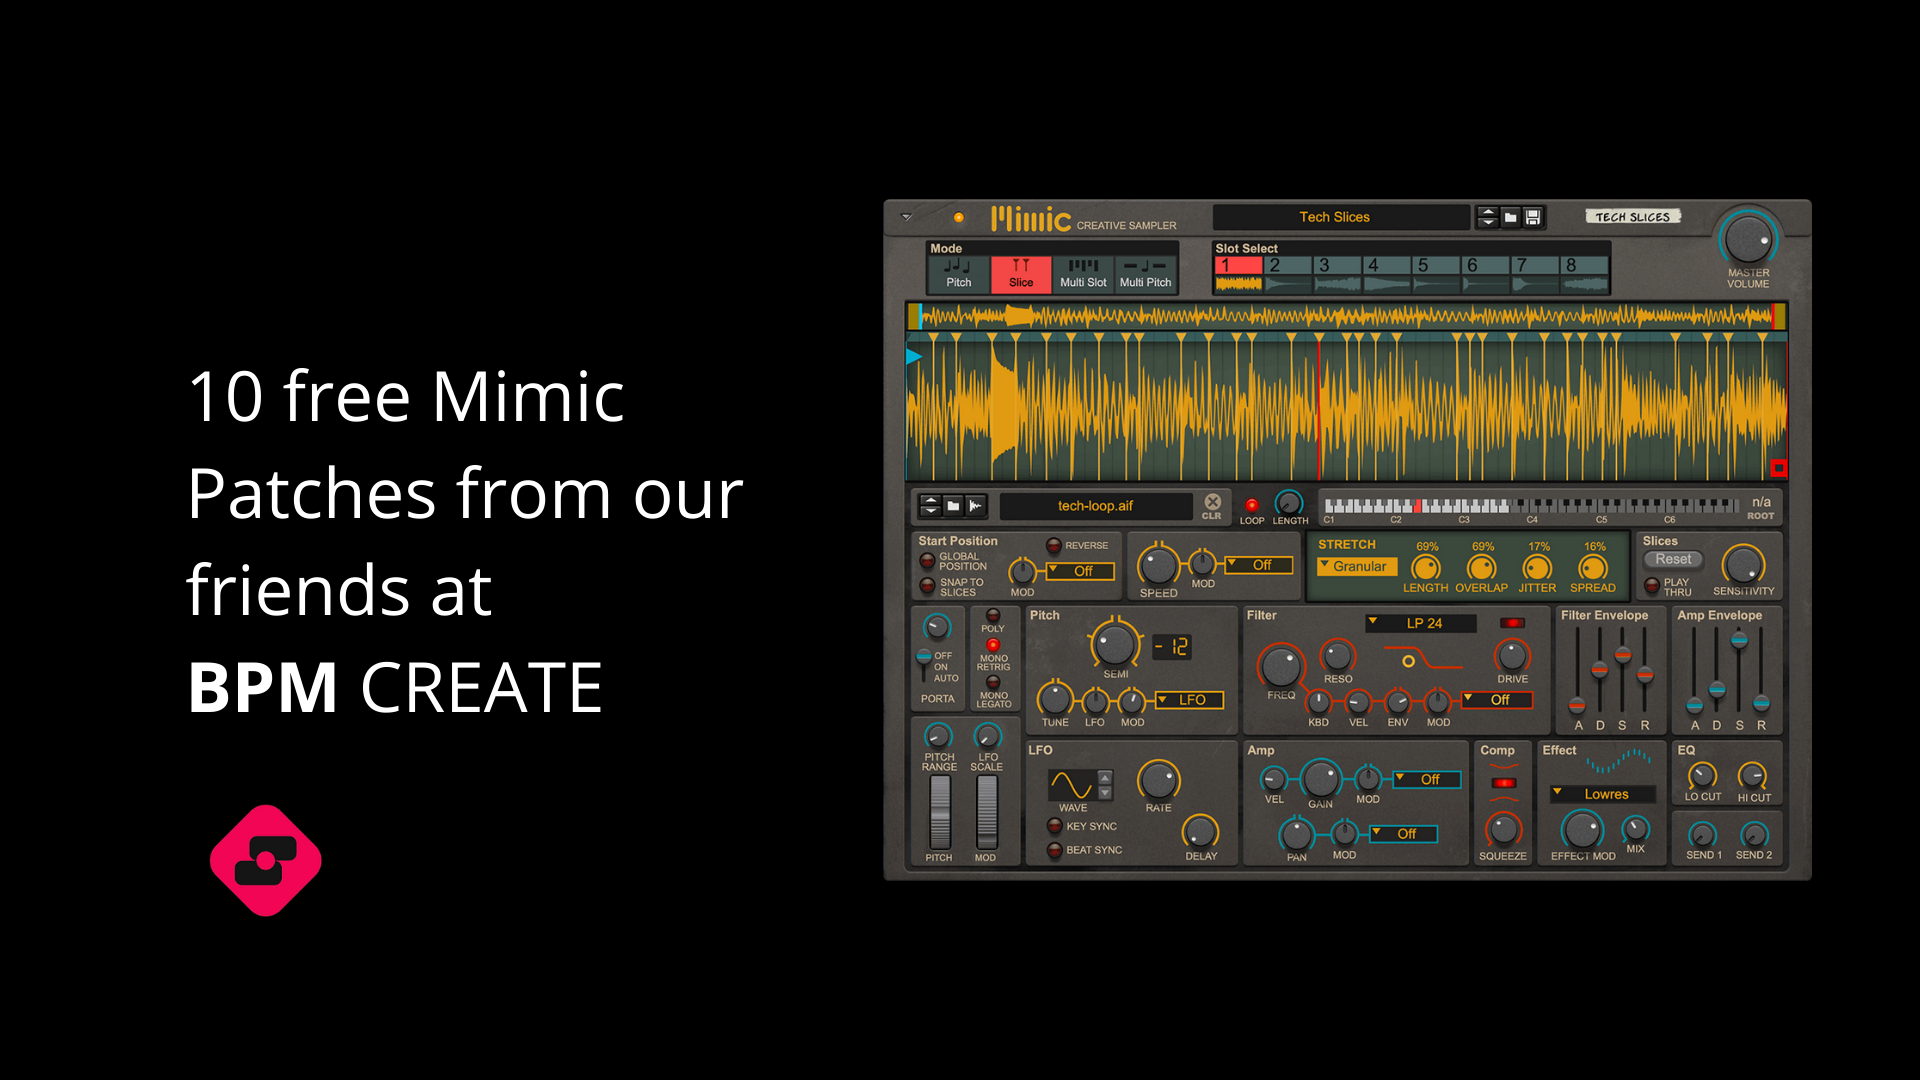 BPM CREATE Mimic Patches Giveaway